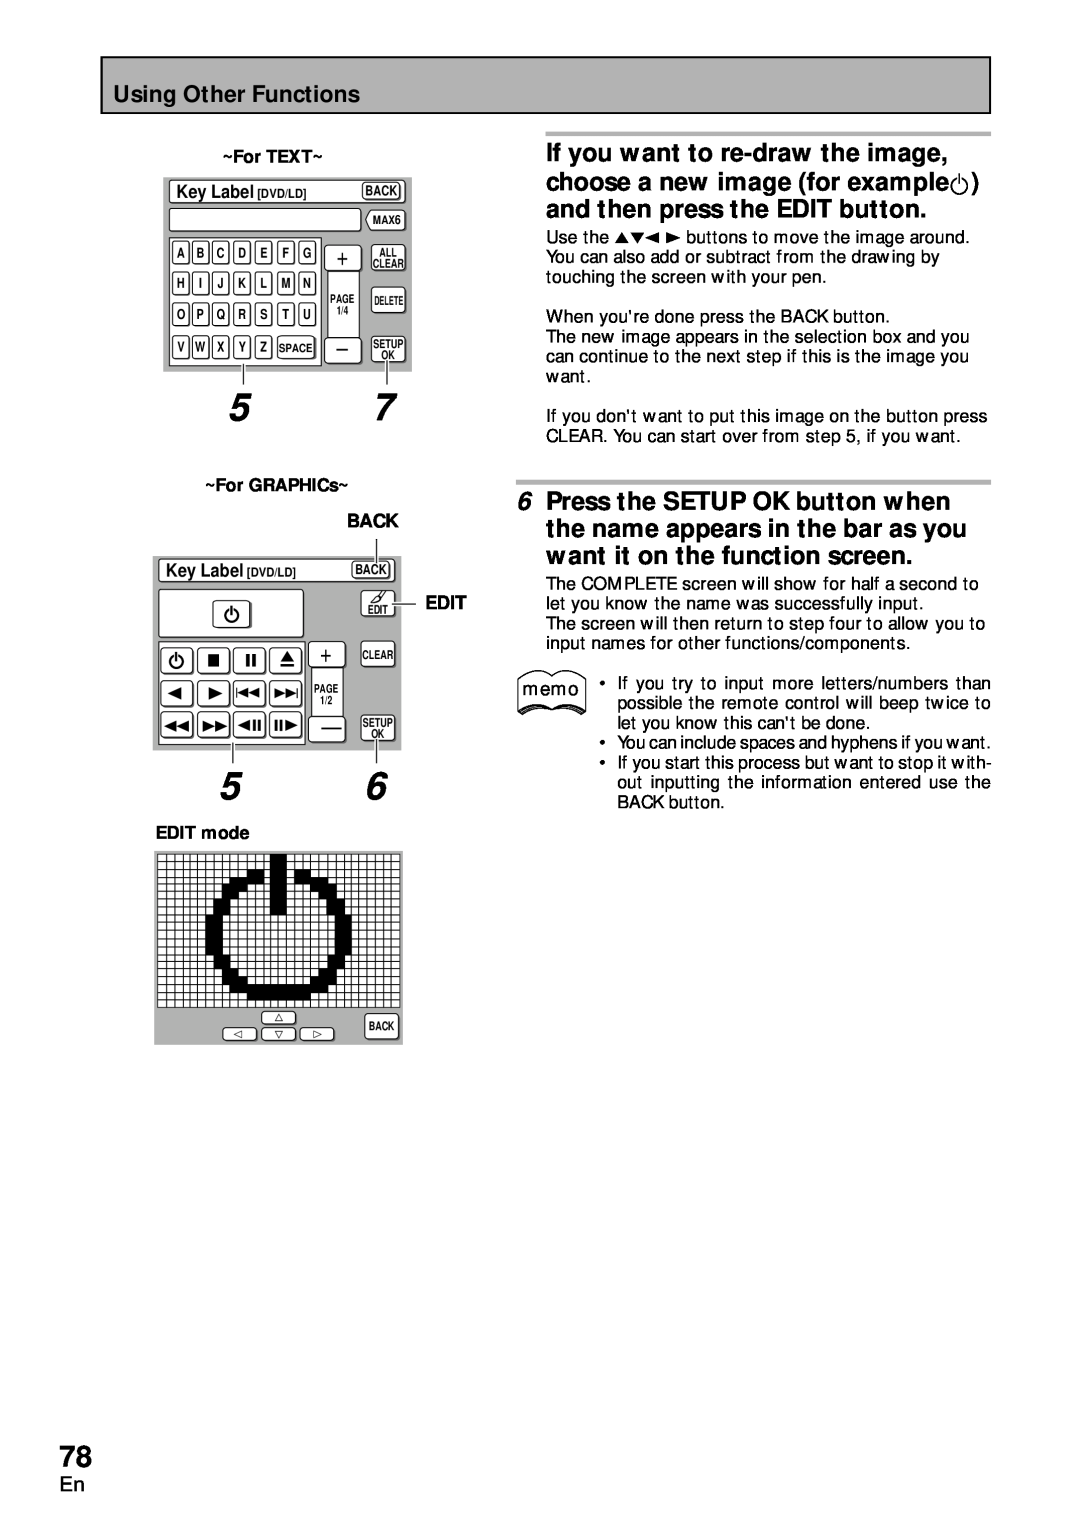 Pioneer VSA-AX10 operating instructions want it on the function screen 